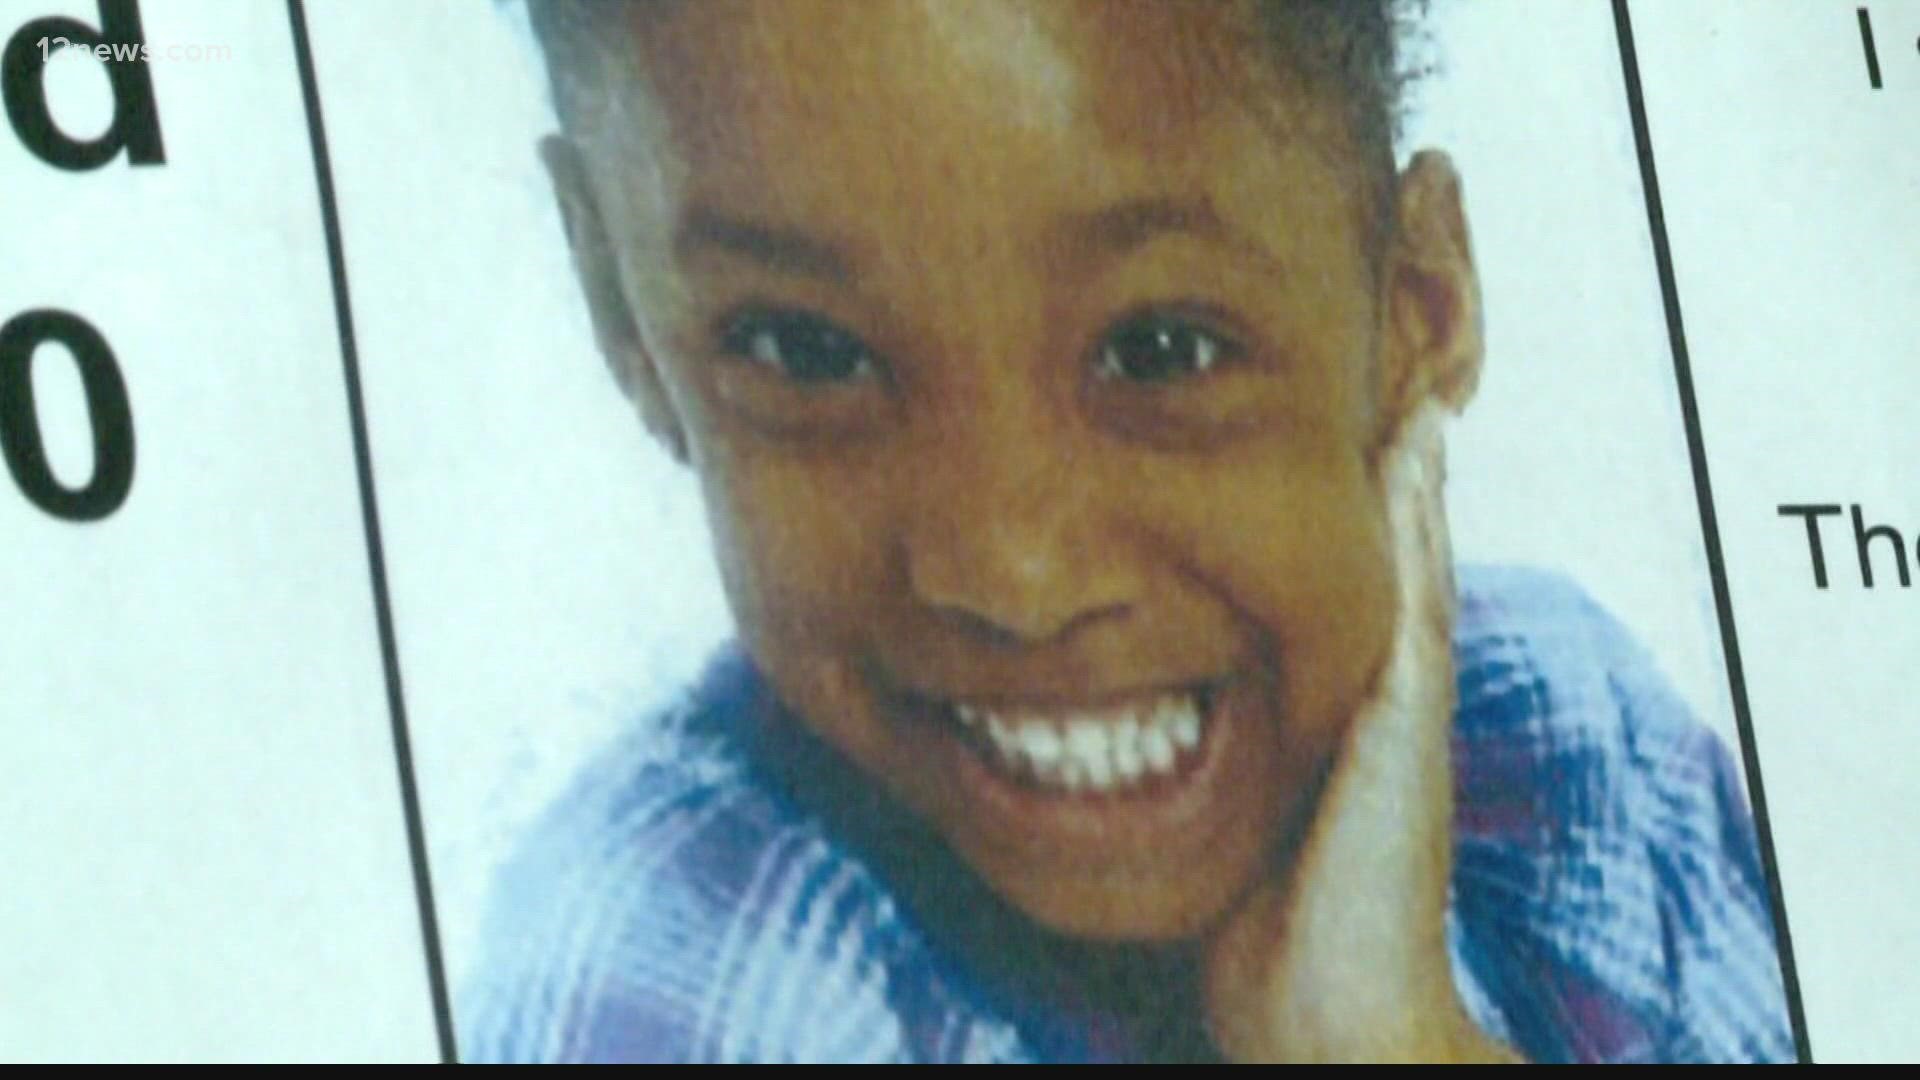 Jhessye Shockley was only 5 when she went missing 10 years ago. Her mother was convicted of killing her and investigators say Jhessye's body may never be found.